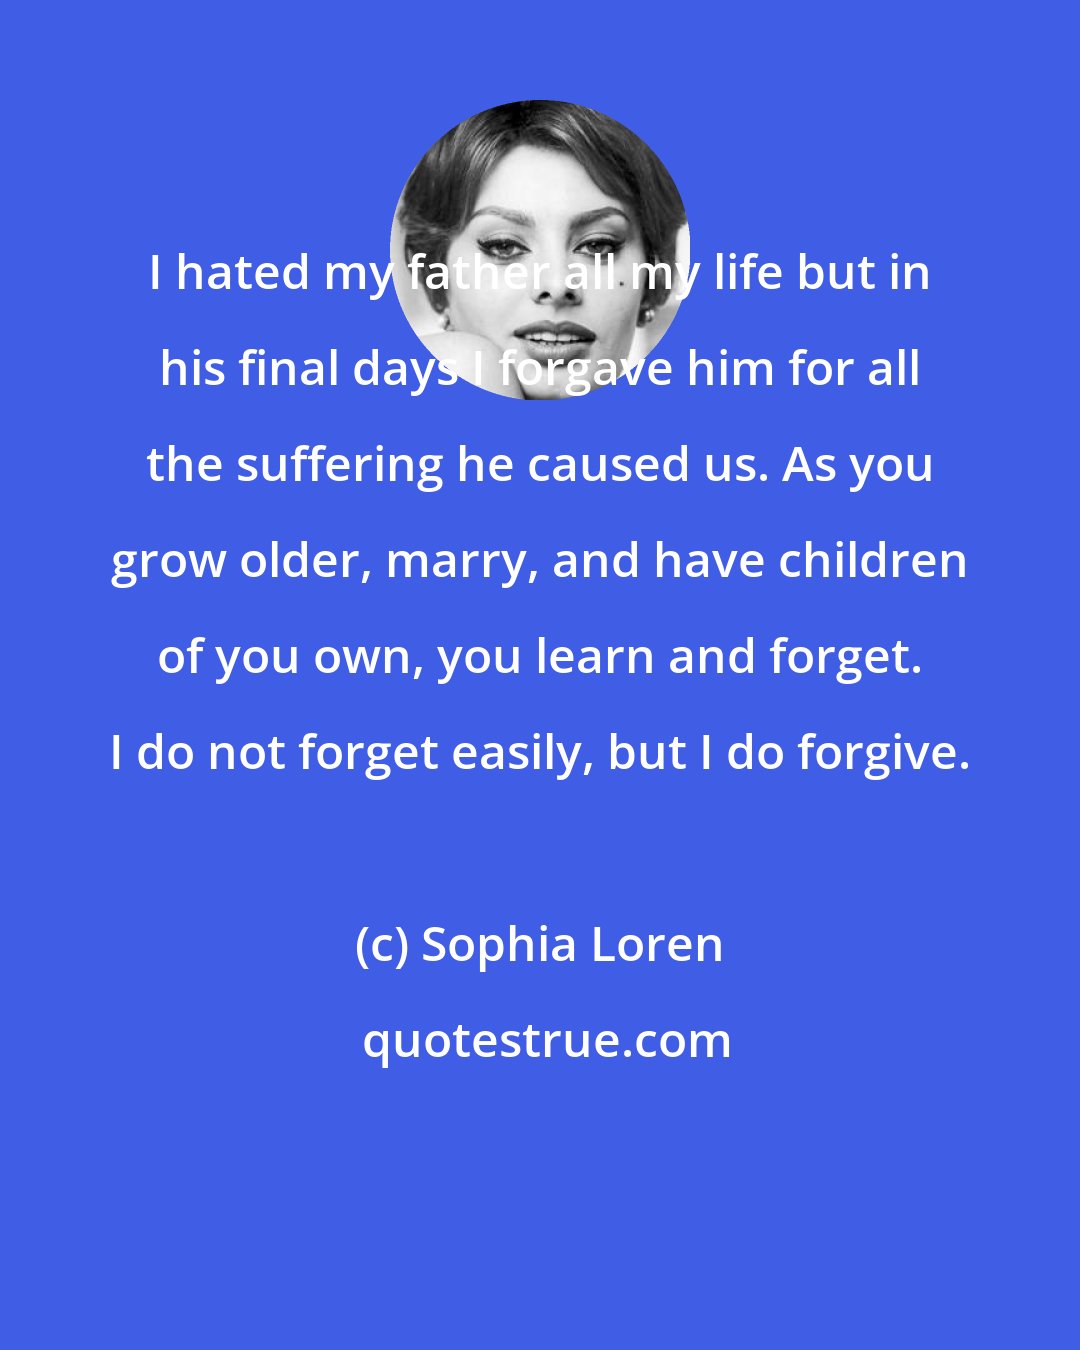 Sophia Loren: I hated my father all my life but in his final days I forgave him for all the suffering he caused us. As you grow older, marry, and have children of you own, you learn and forget. I do not forget easily, but I do forgive.